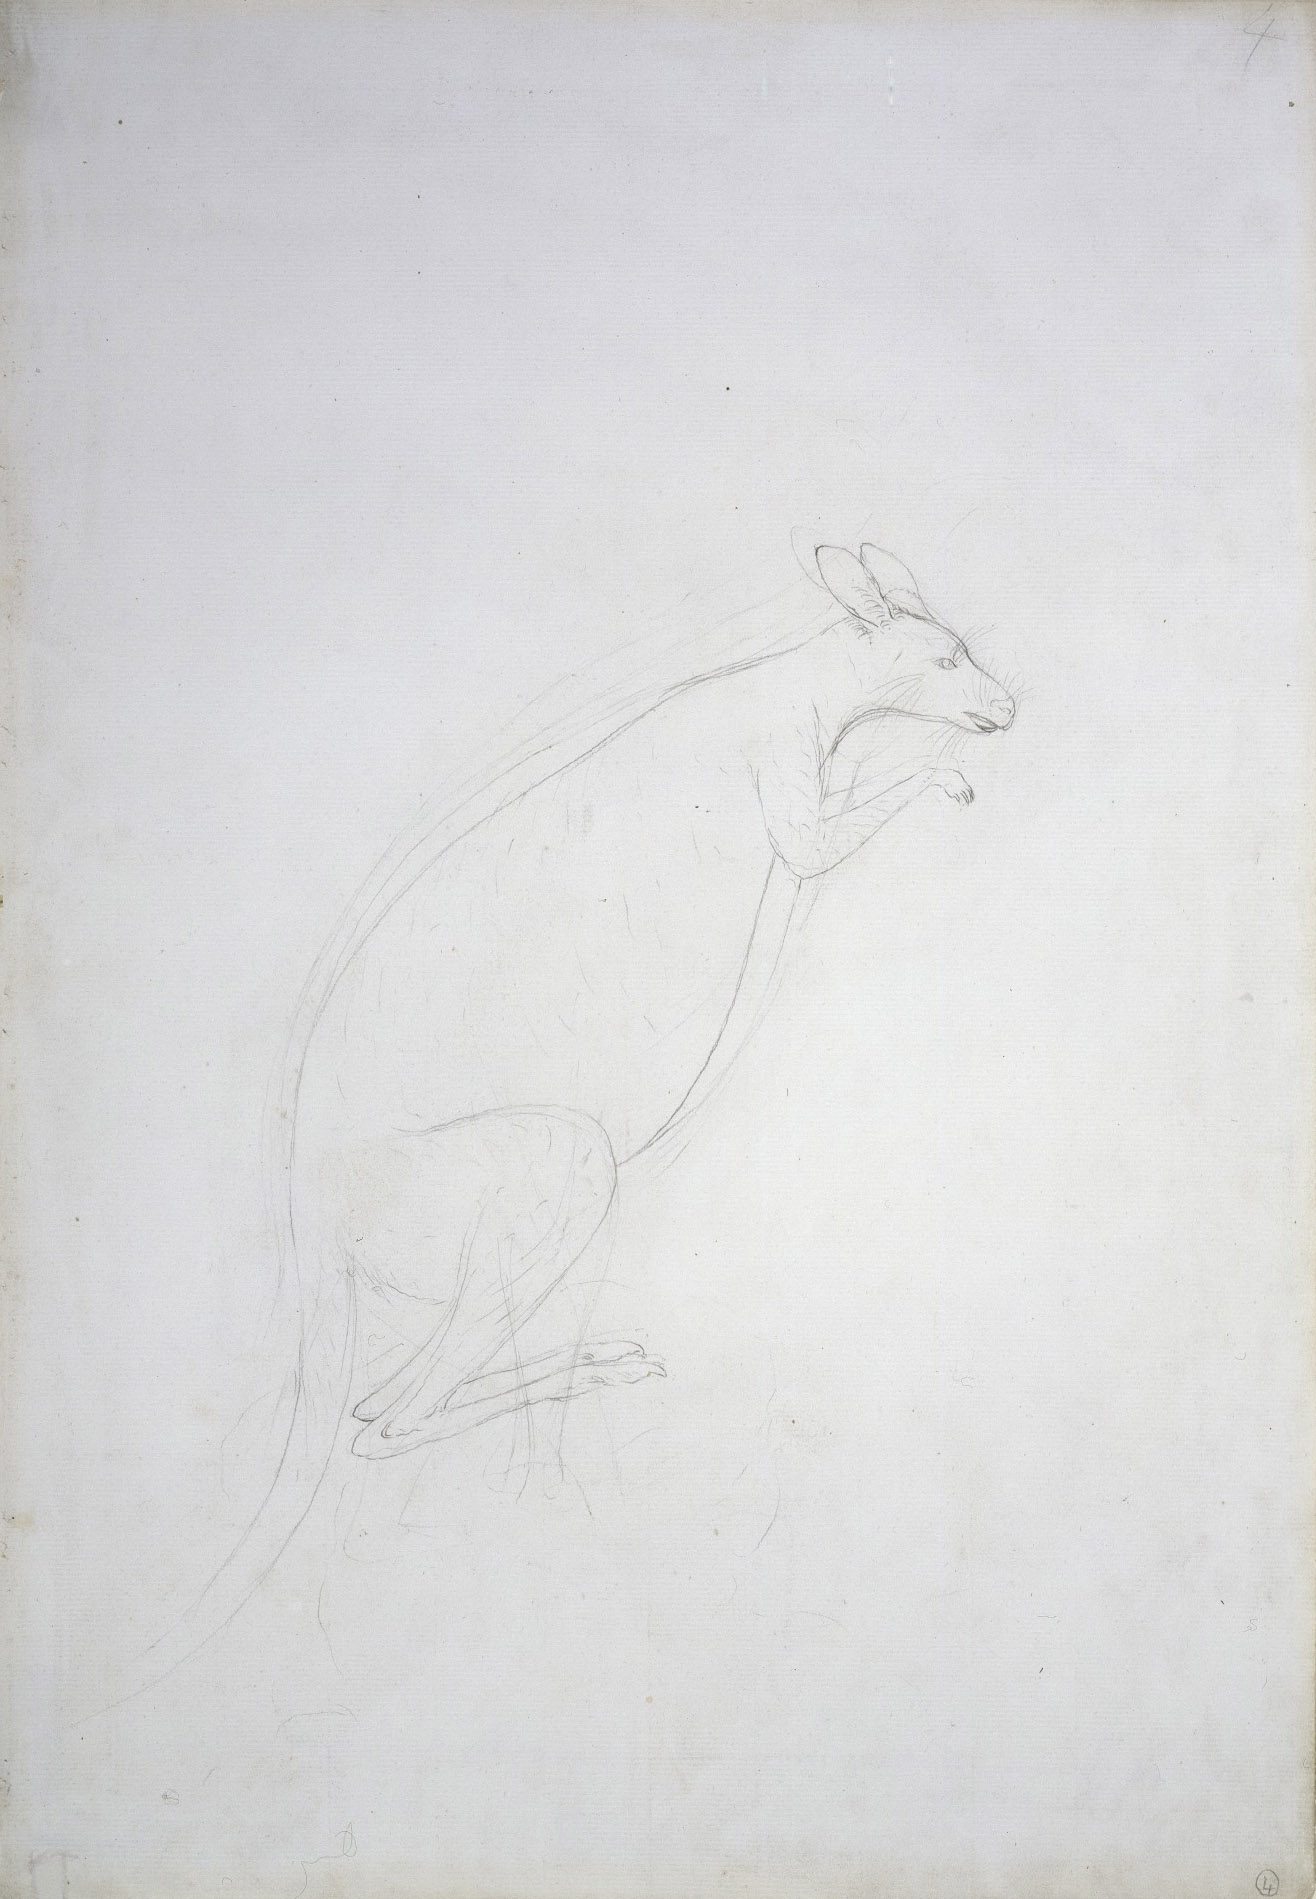 <p>The first European drawing of a kangaroo, made by Sydney Parkinson at Endeavour River</p>
